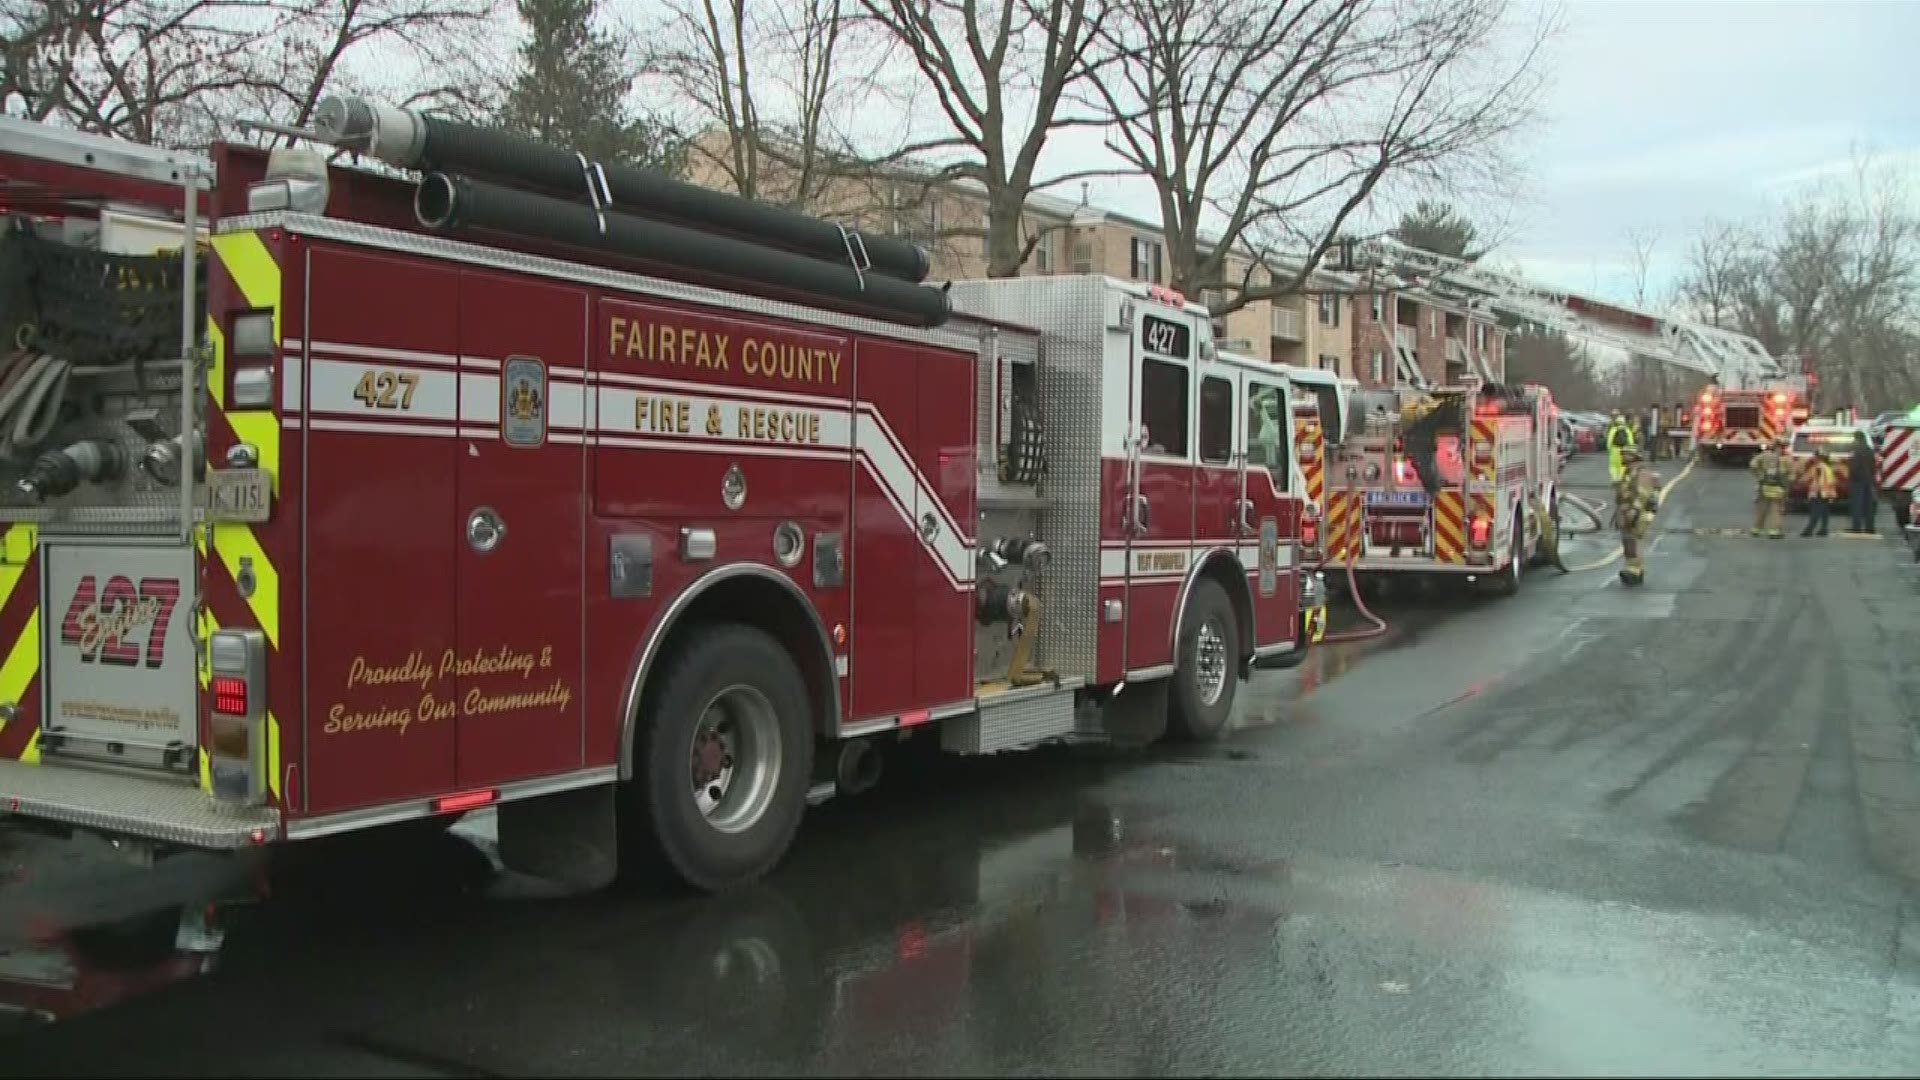 A Fairfax County Fire Captain is demoted after allegations of sexual harassment. The complaint describes inappropriate touching of a female recruit at a local bar.